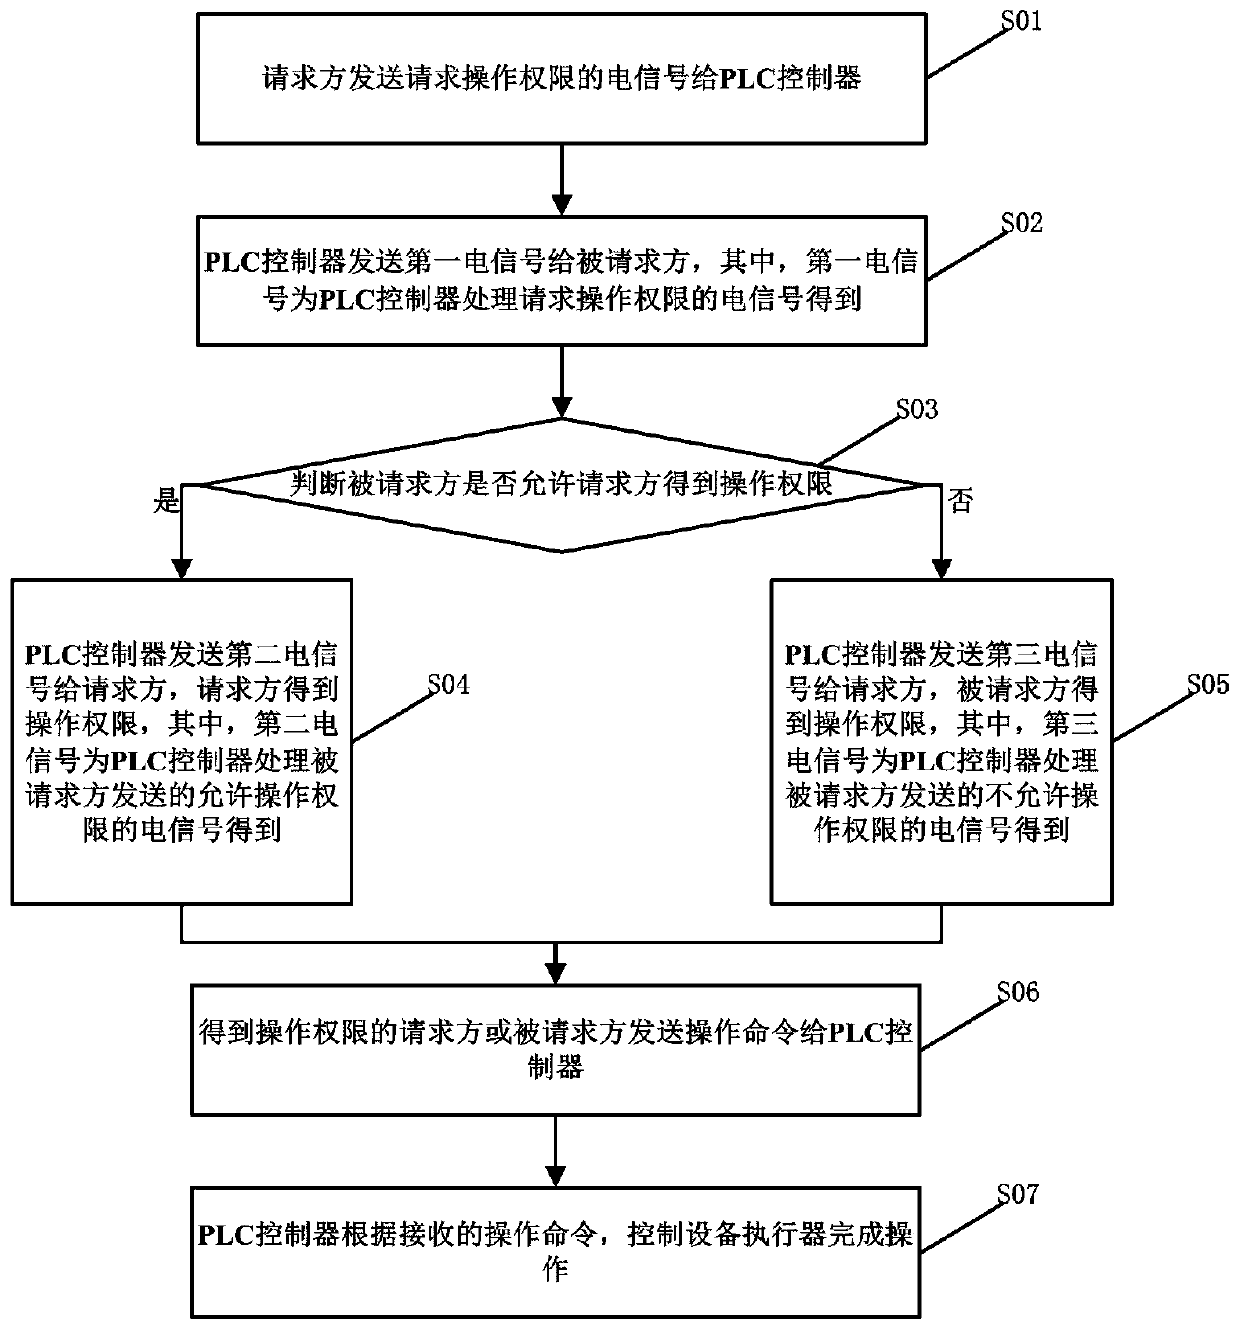 Remote operation control method applied to centralized management and control of equipment